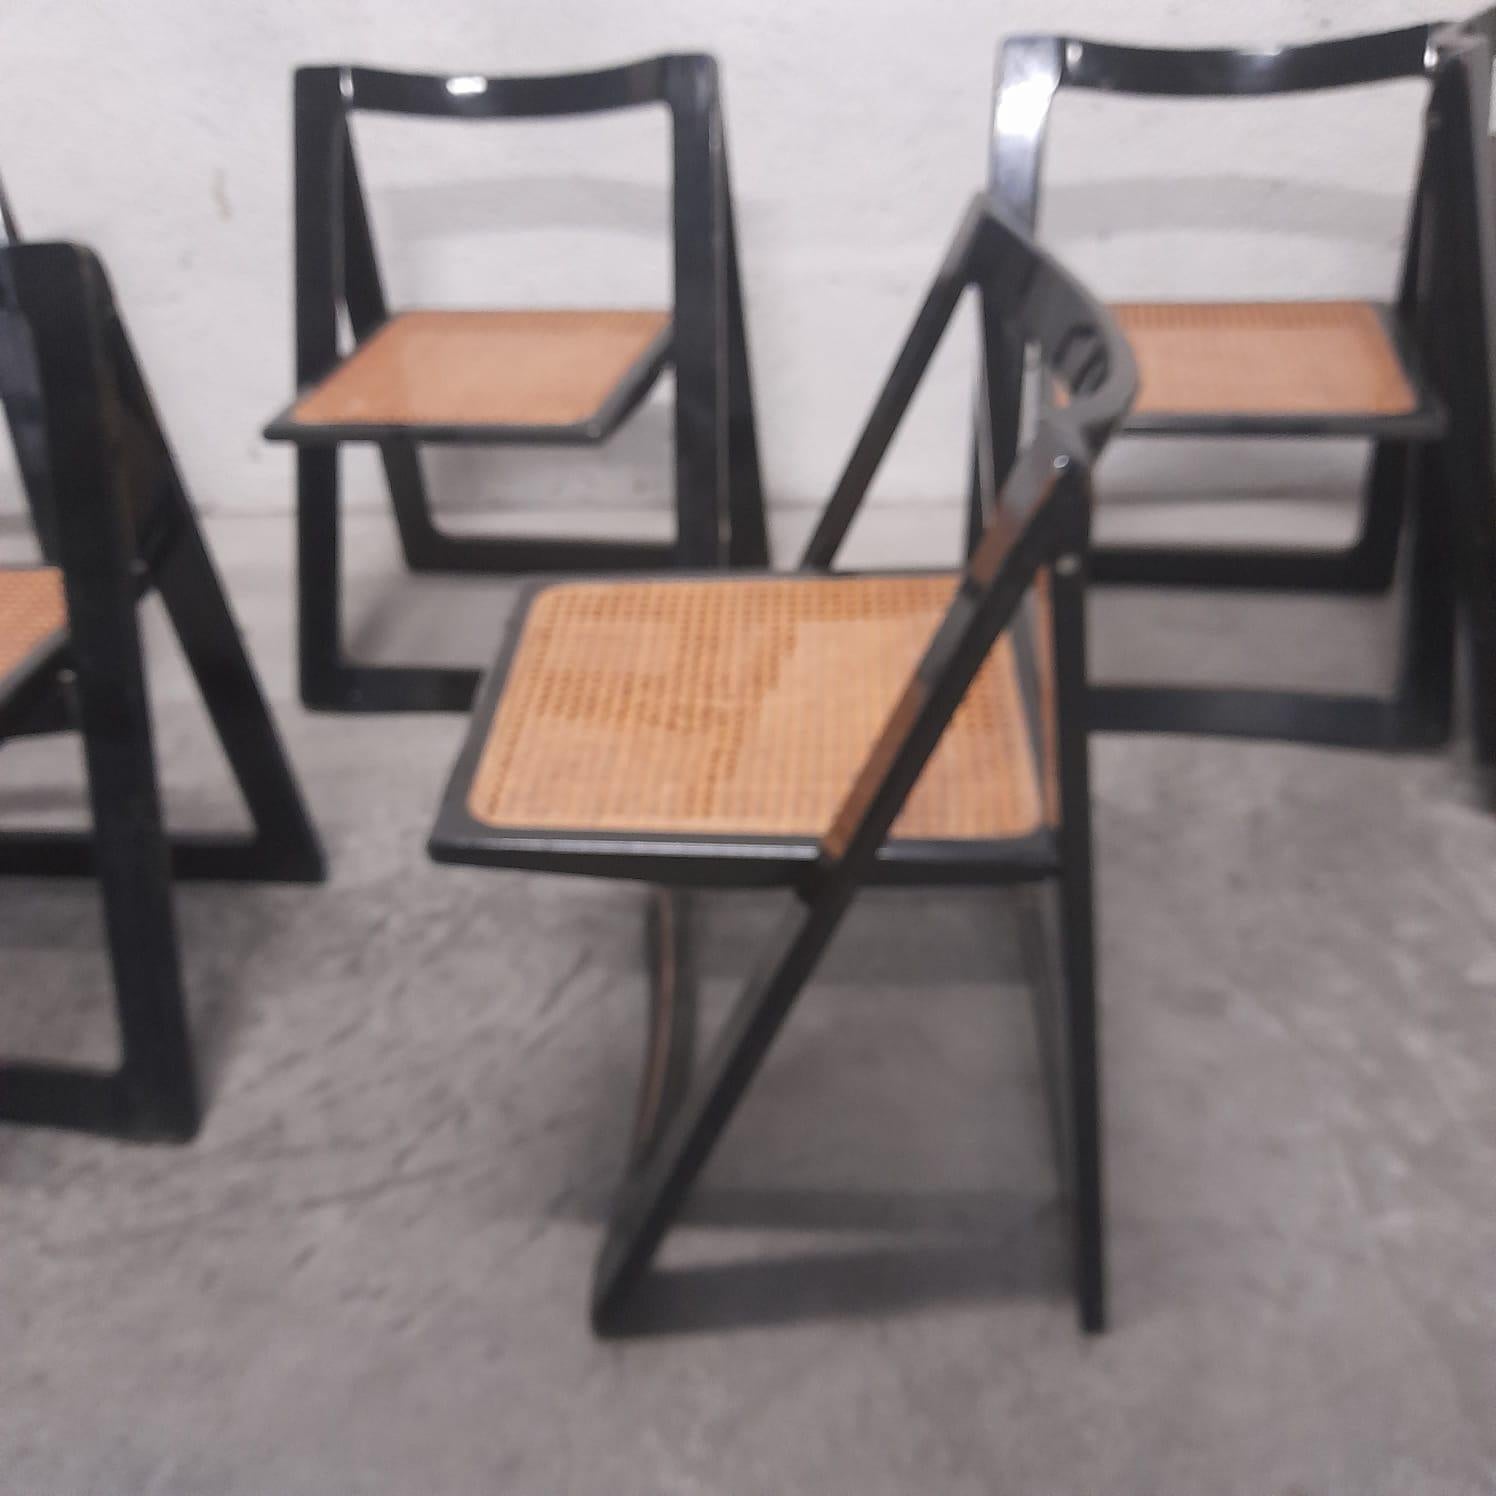 Set of 6 Italian folding Trieste Chairs by Jacober and D'aniello for Bazzani in black lacquered wood with original Vienna Straw seats.
One of the seats must be replaced; the replacement is included in the cost of the set.